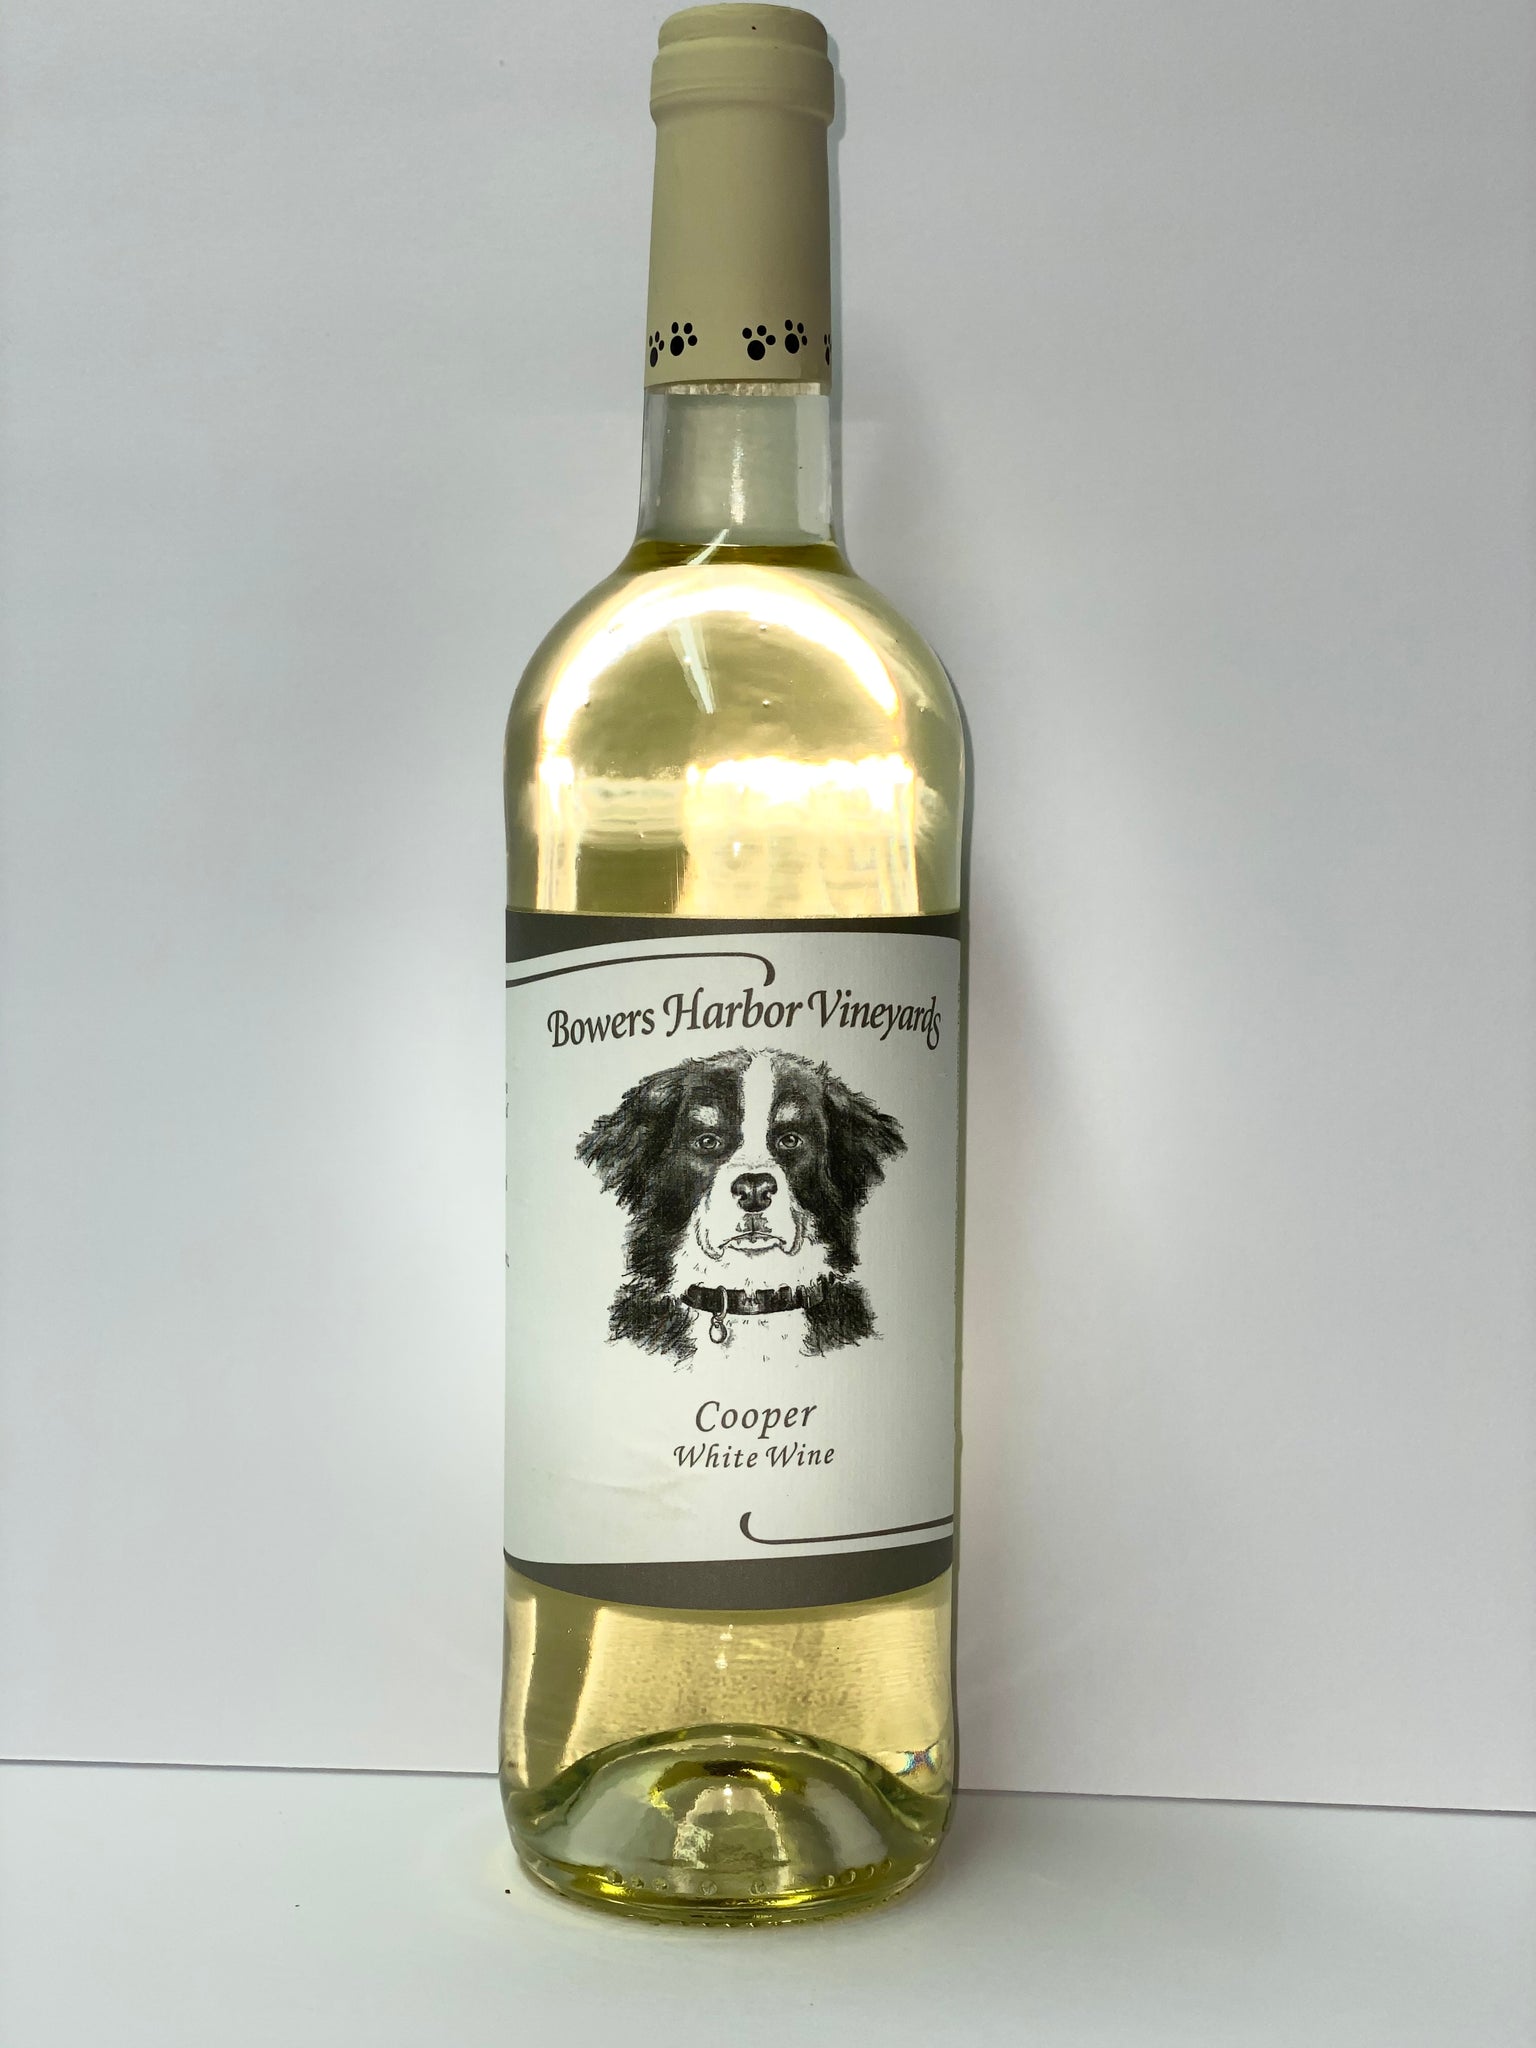 Cooper White Wine - Delivery only. Must be present for age verification.